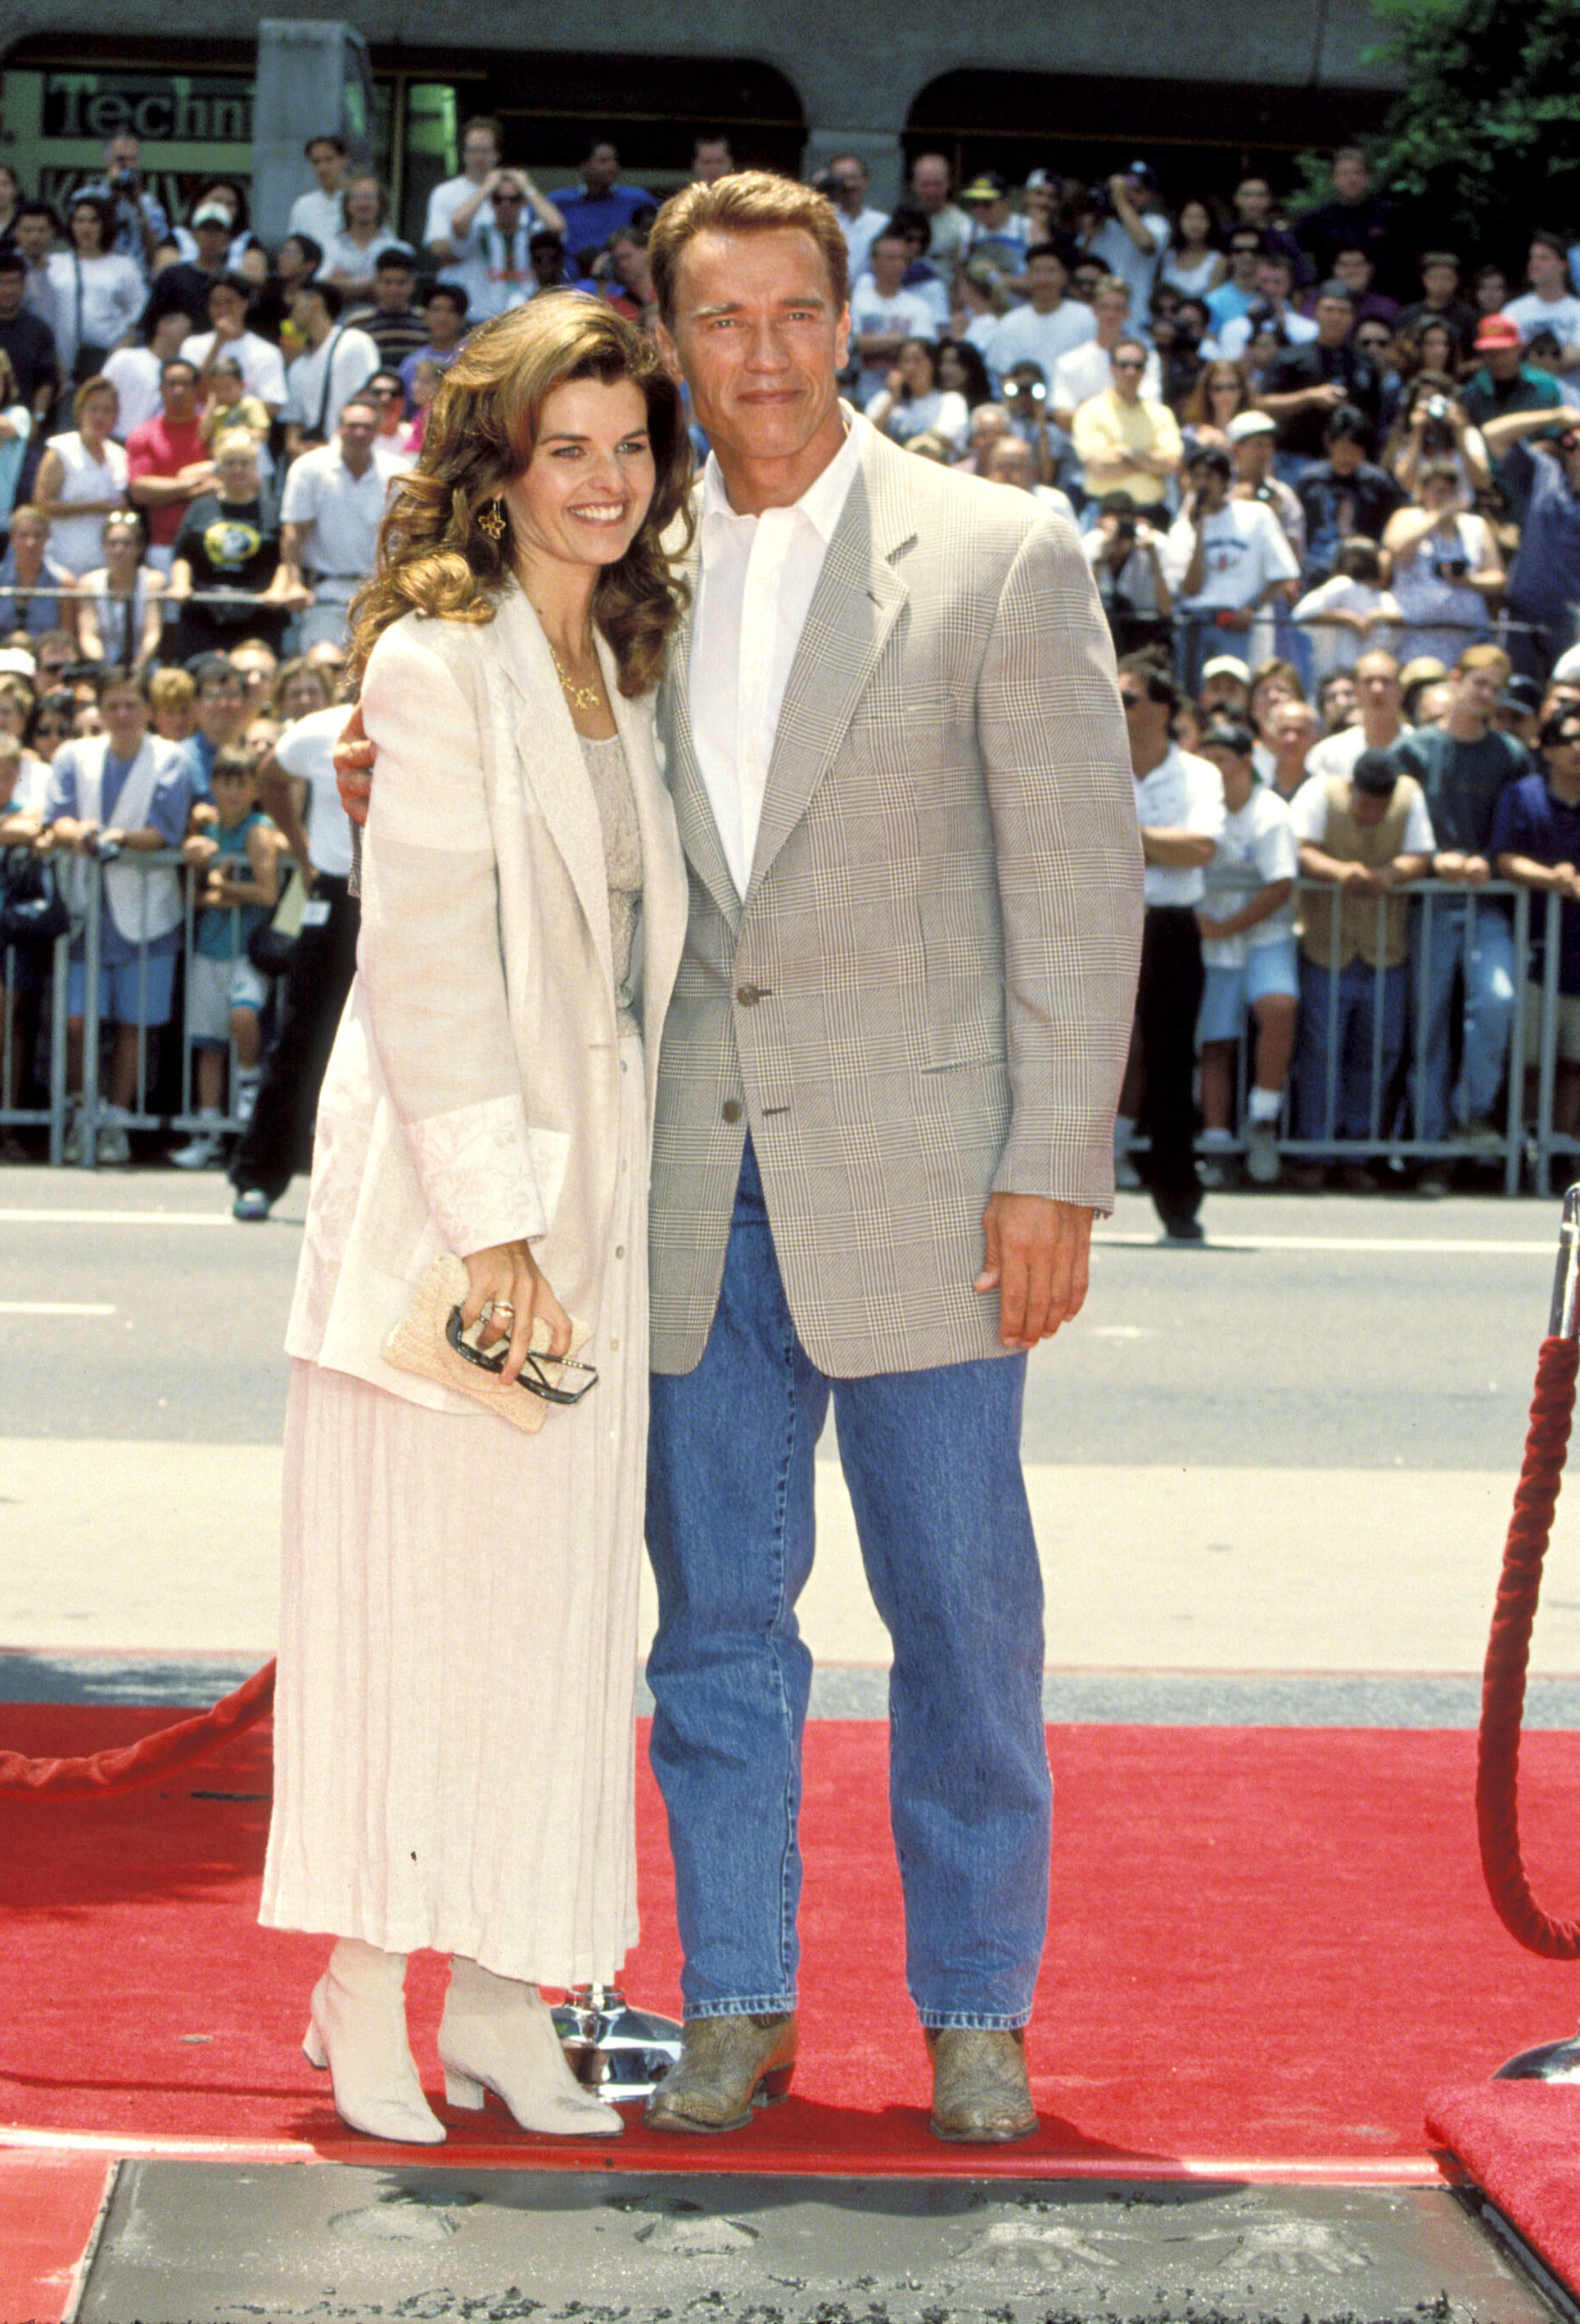 Arnold Schwarzenegger smiles in a suit in front of a crowd with Maria Shriver